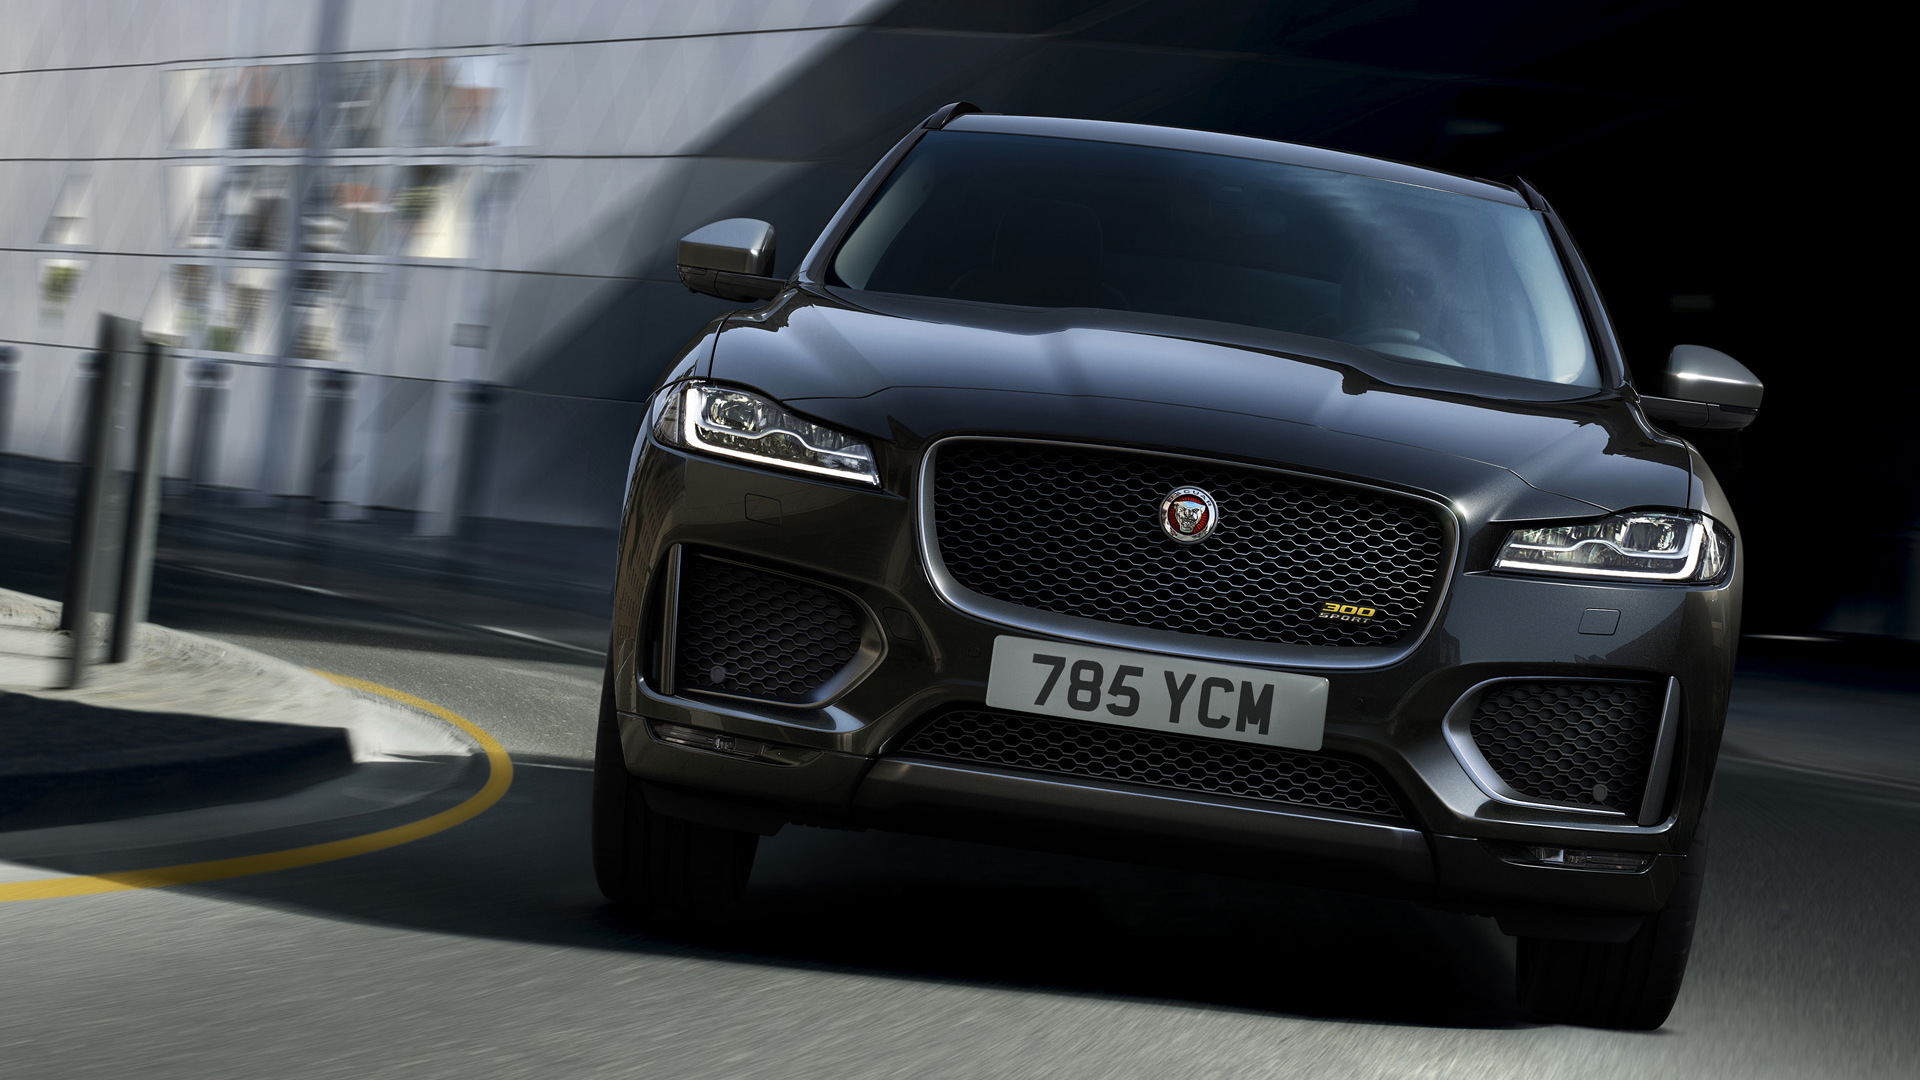 2020 Jaguar F Pace Lineup Expands With Two New Arrivals